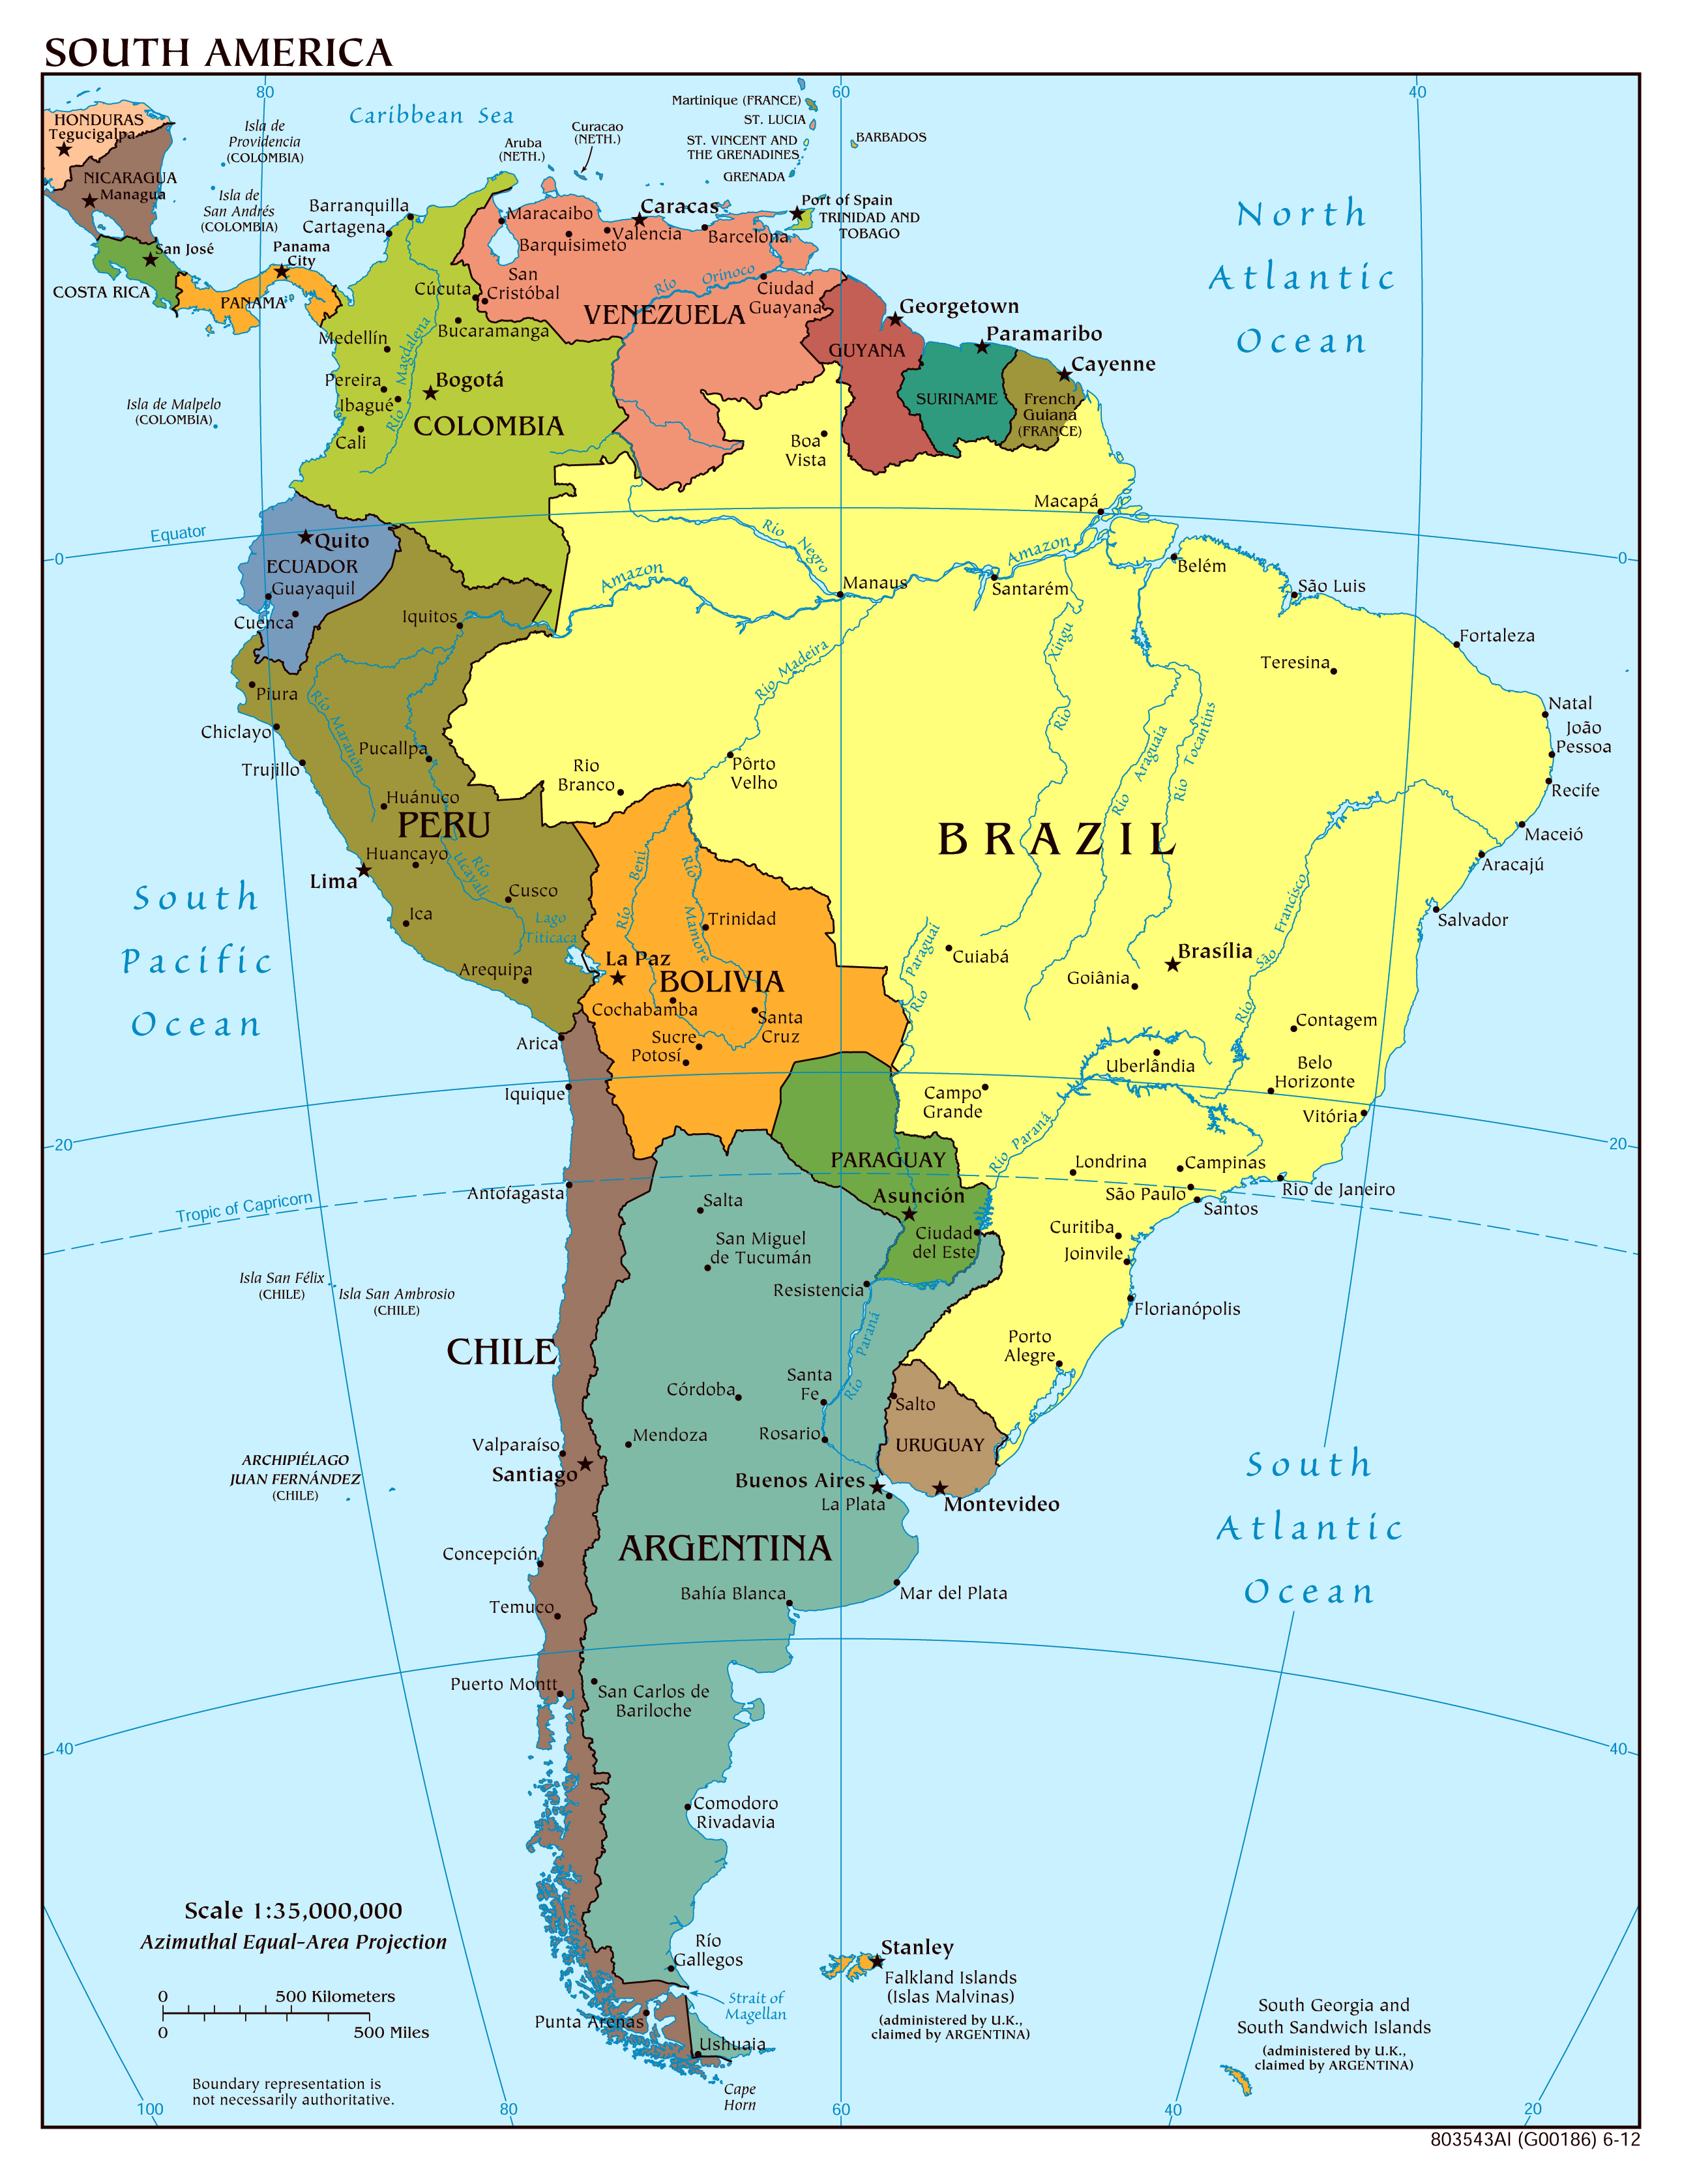 maps-of-south-america-and-south-american-countries-political-maps